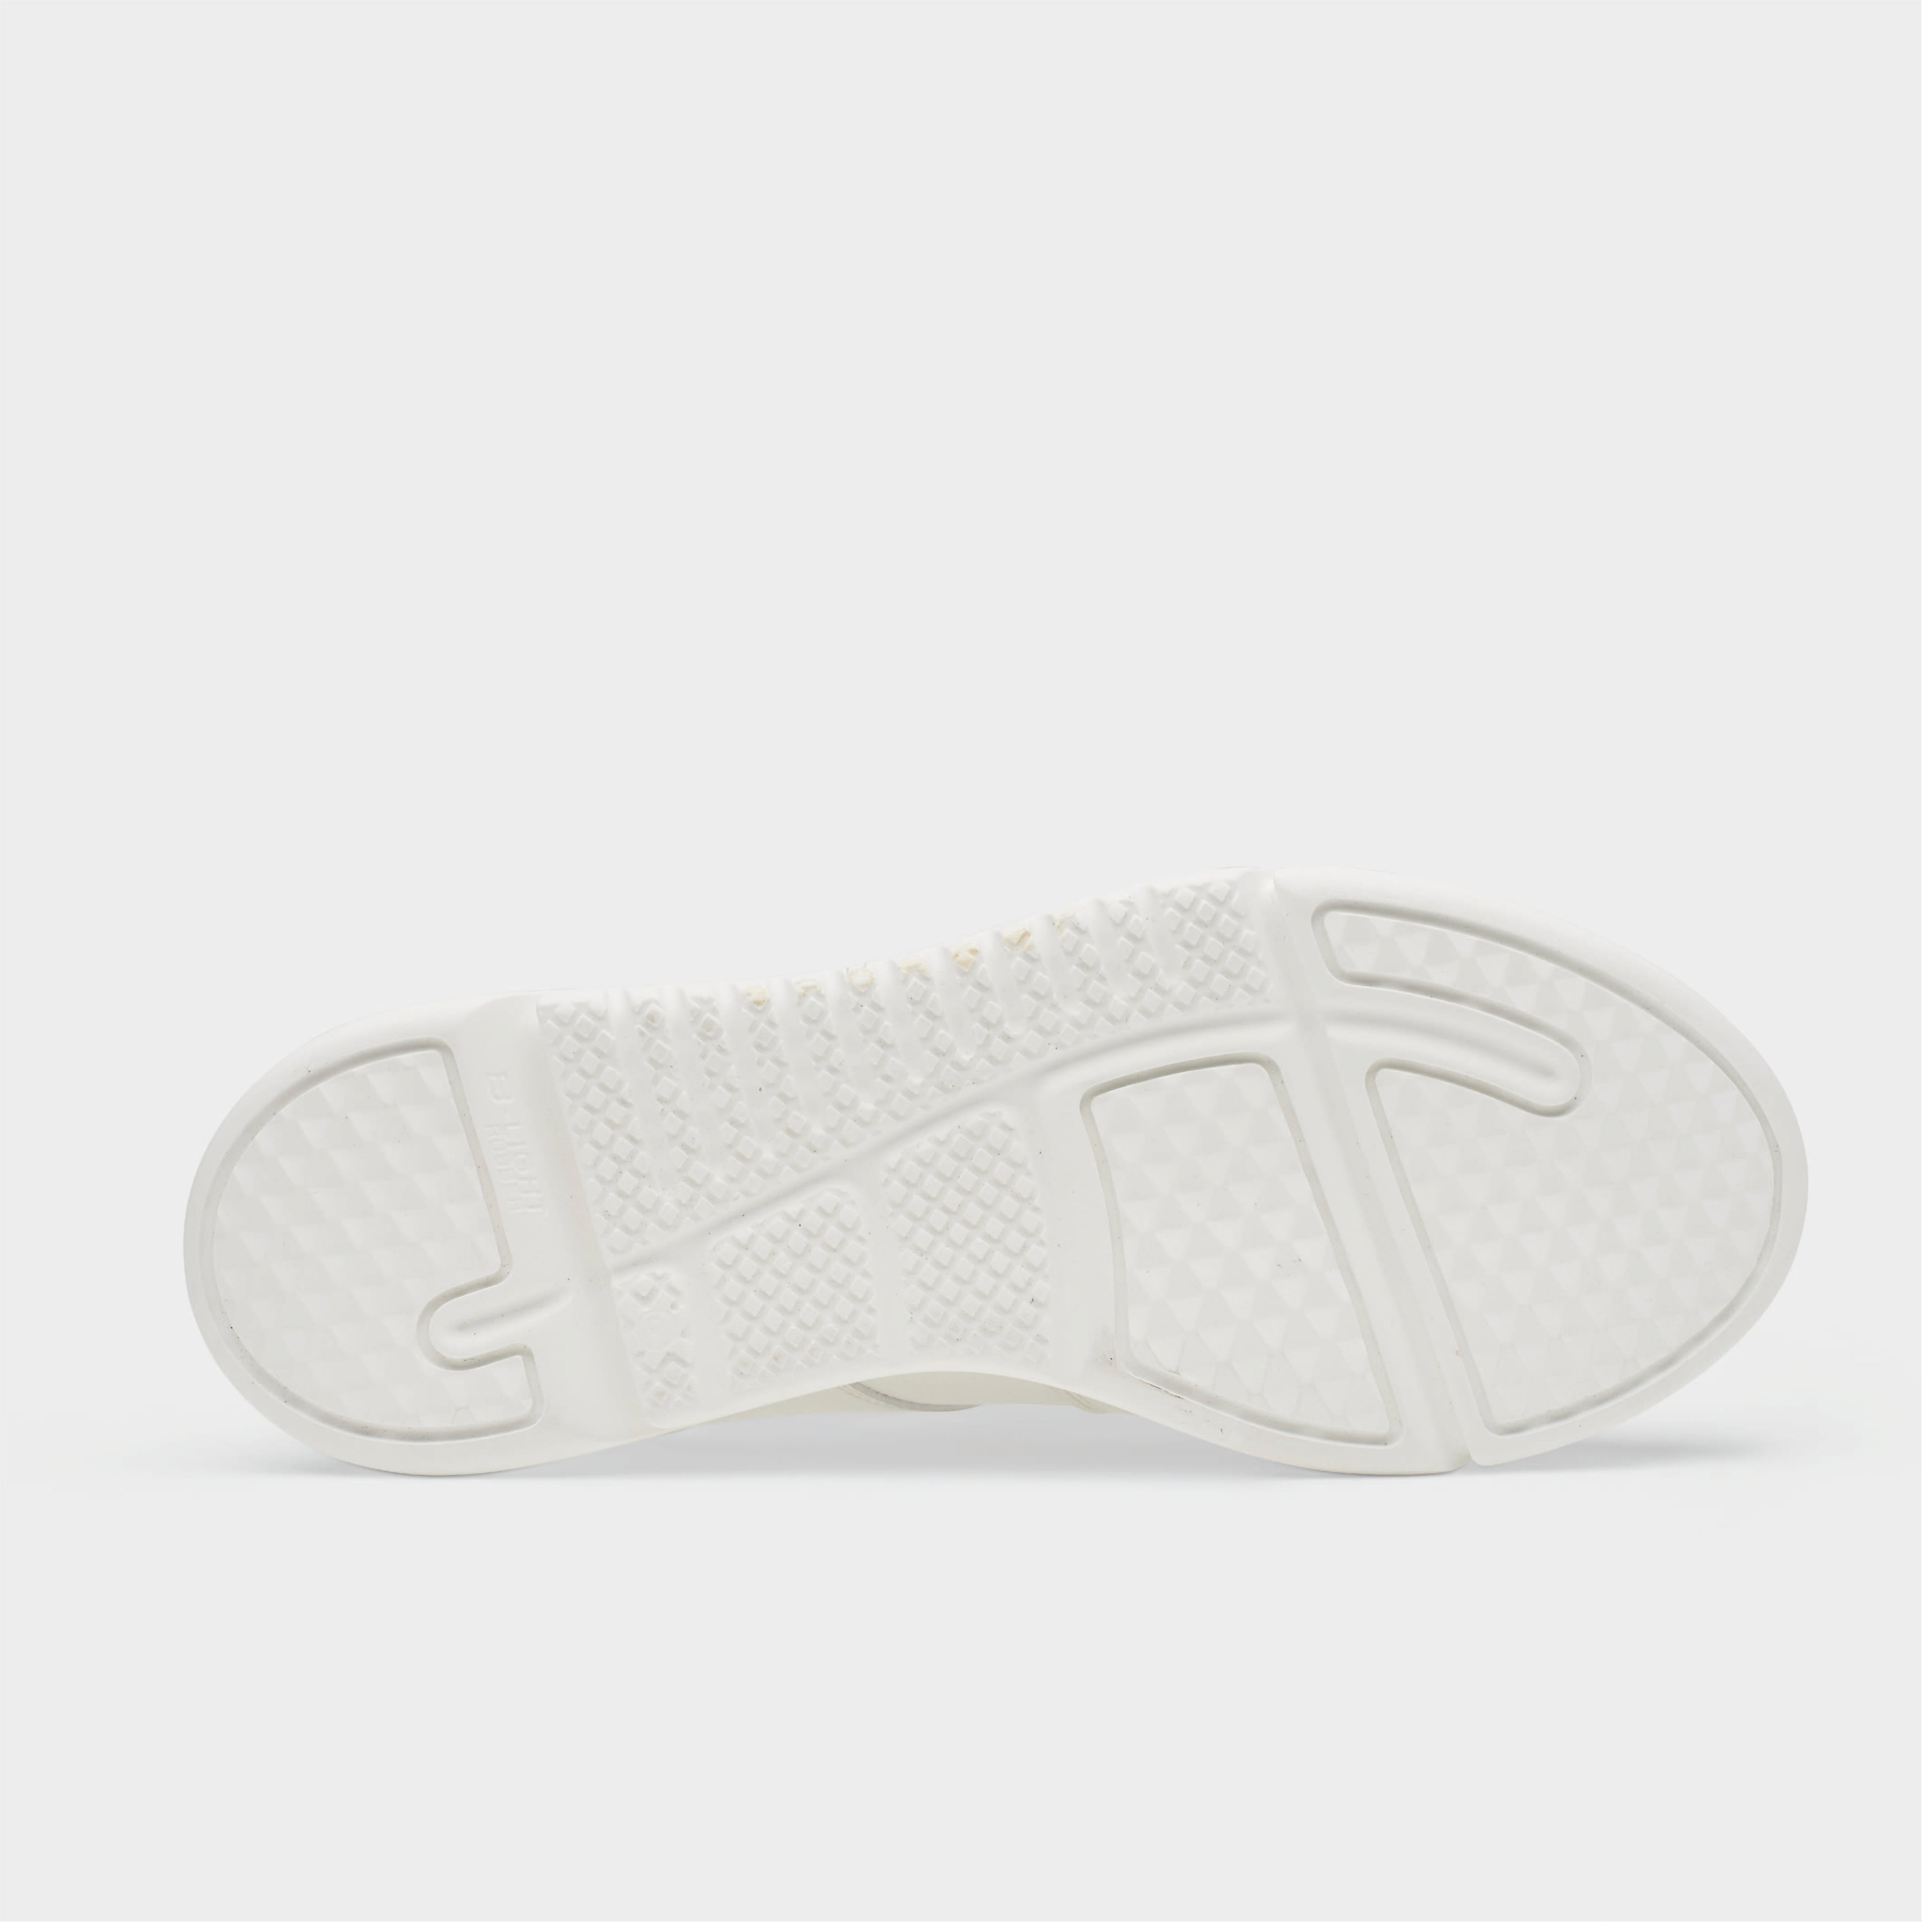 Challenge V3 Sustainable Sneaker White Sole